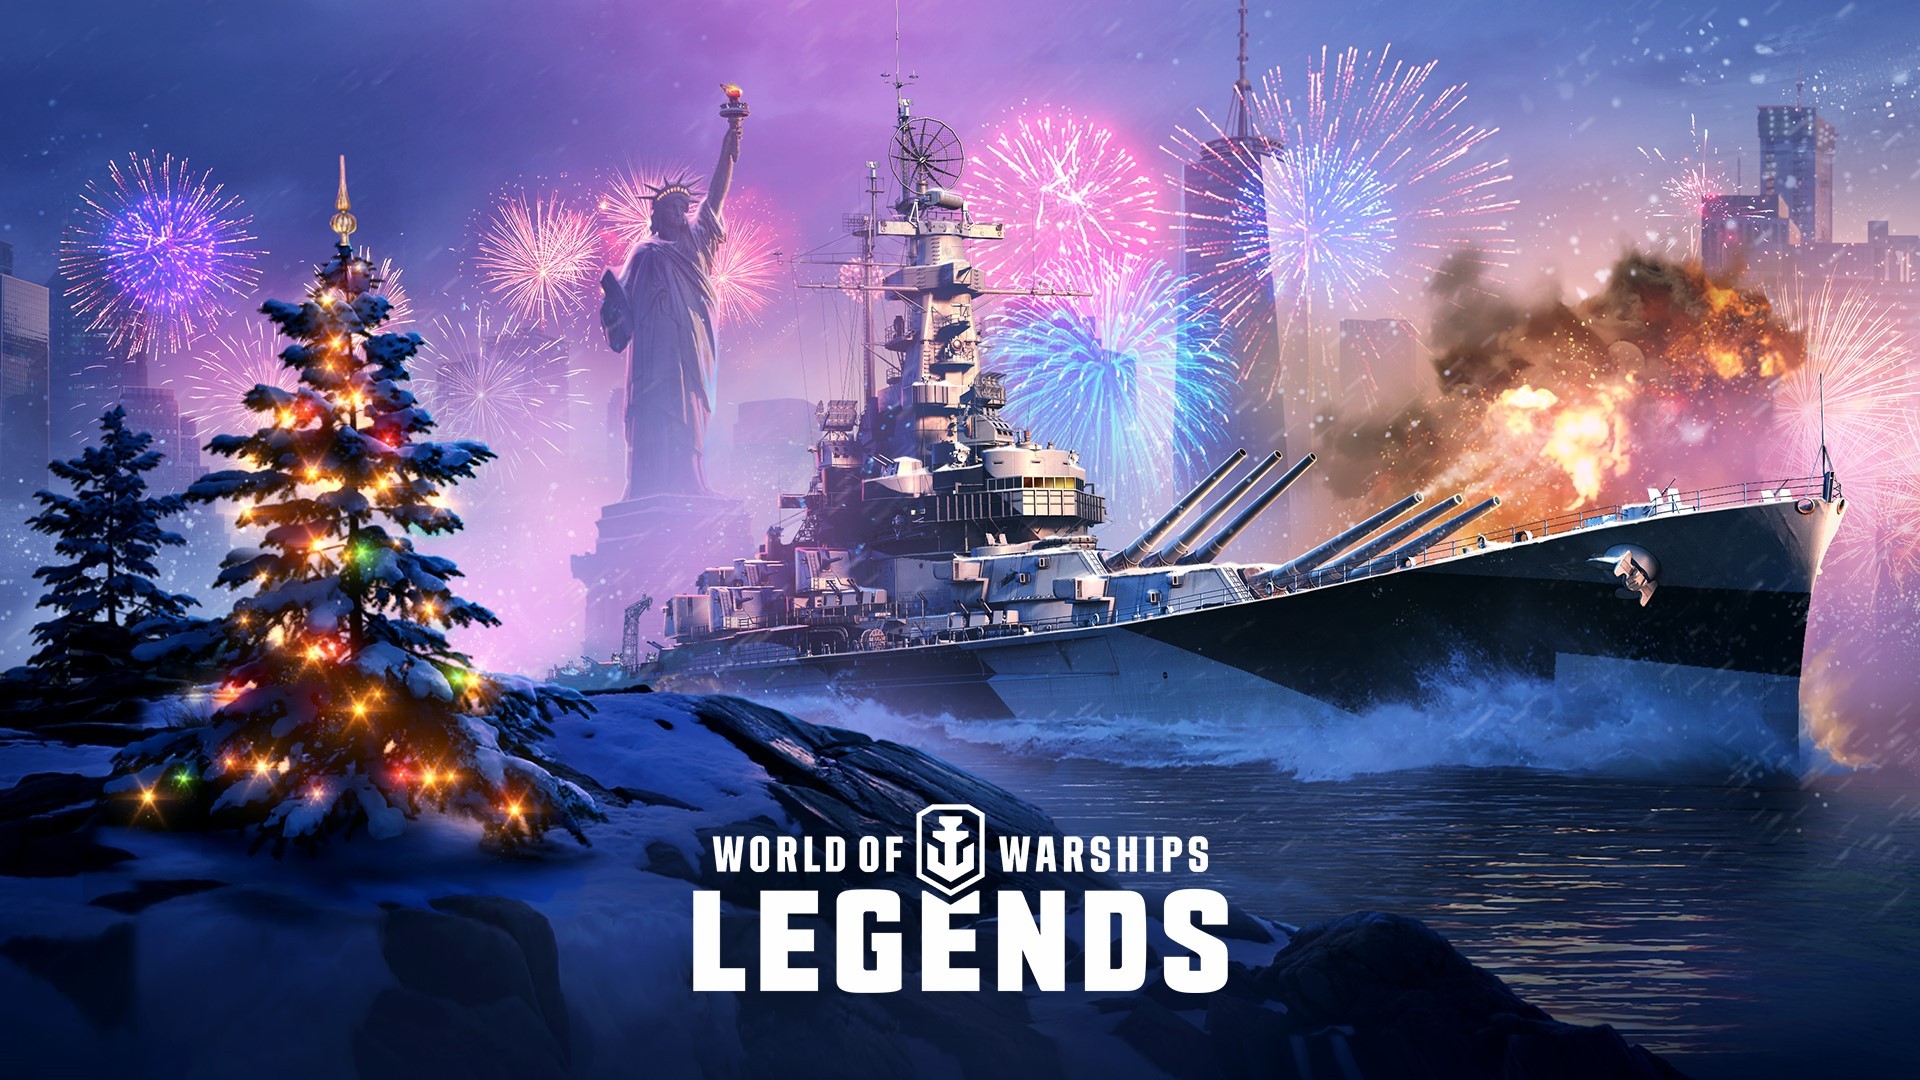 World of Warships: Legends Readies For The Holidays